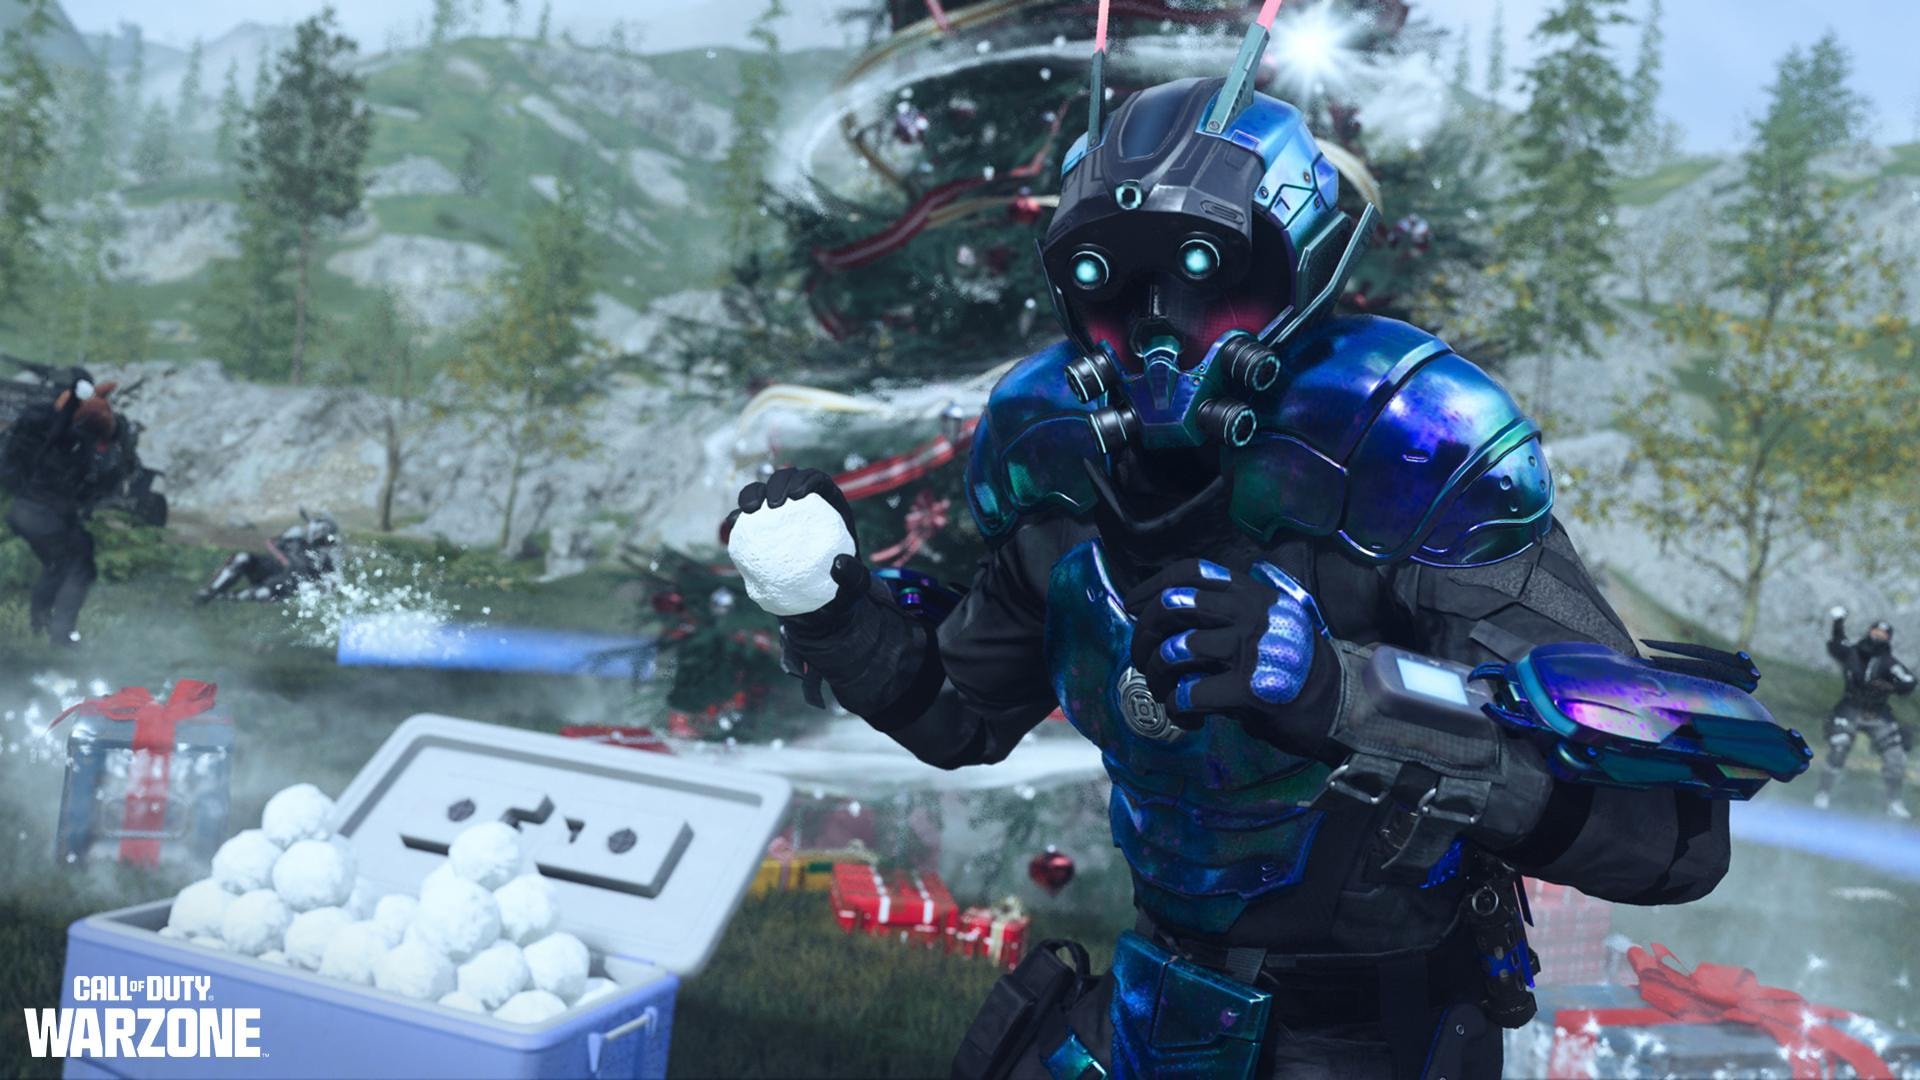 cod-mw3-and-warzone-holiday-event-includes-deadly-snowball-fights-killer-zombie-santa